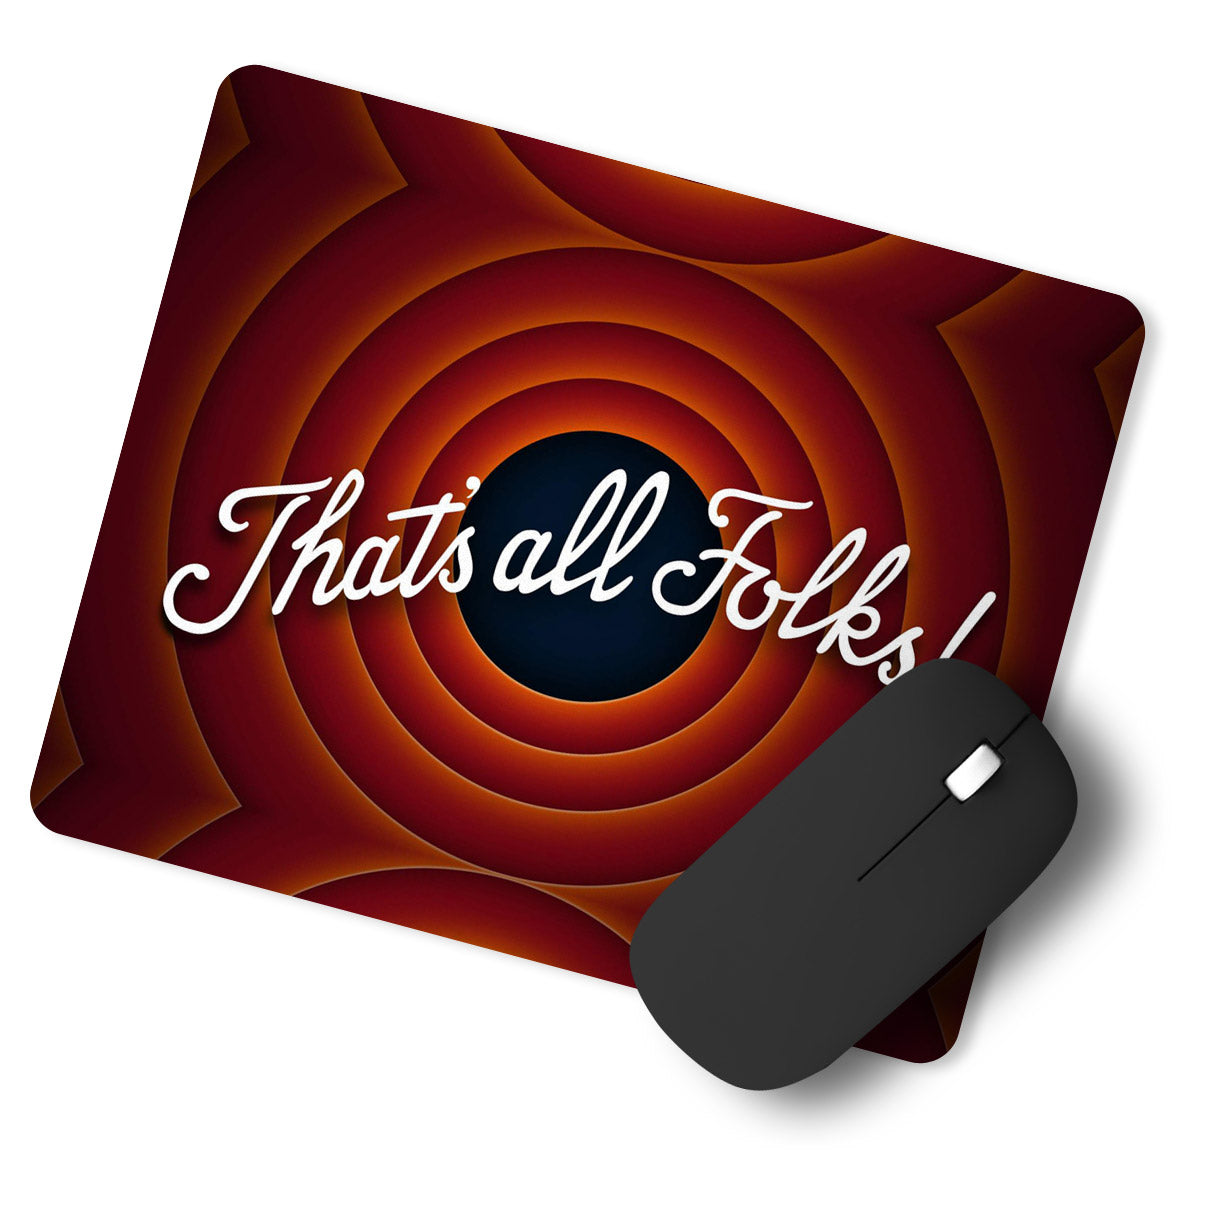 Thats All Folks Designer Printed Premium Mouse pad (9 in x 7.5 in)